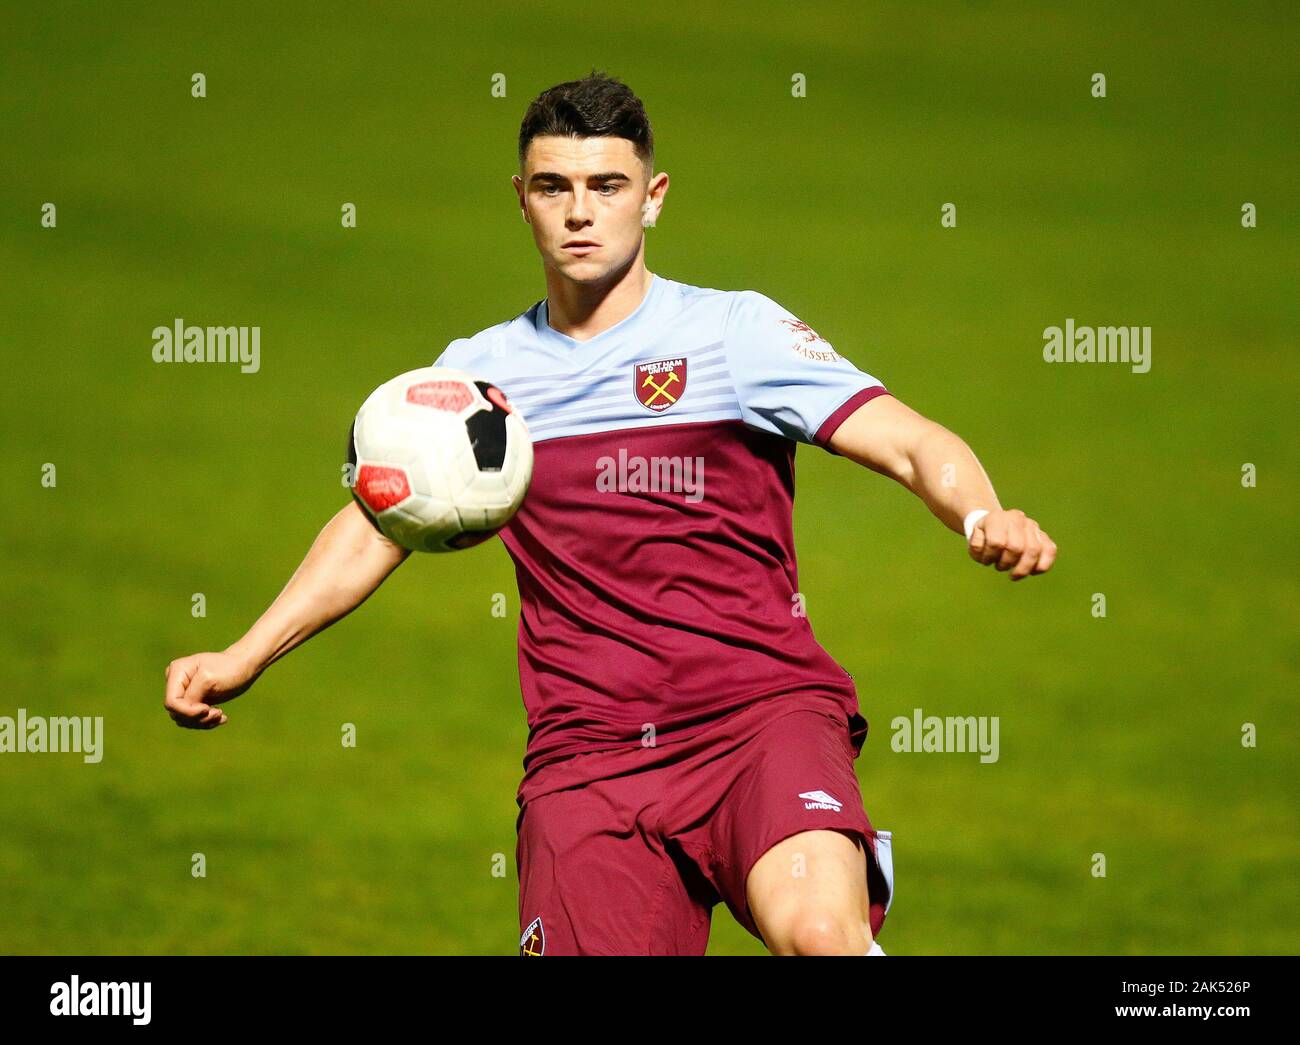 LONDON, ENGLAND. JANUARY 06: Joe Powell of West Ham United in action  during Premier League 2  match between West Ham United and Manchester United at Stock Photo